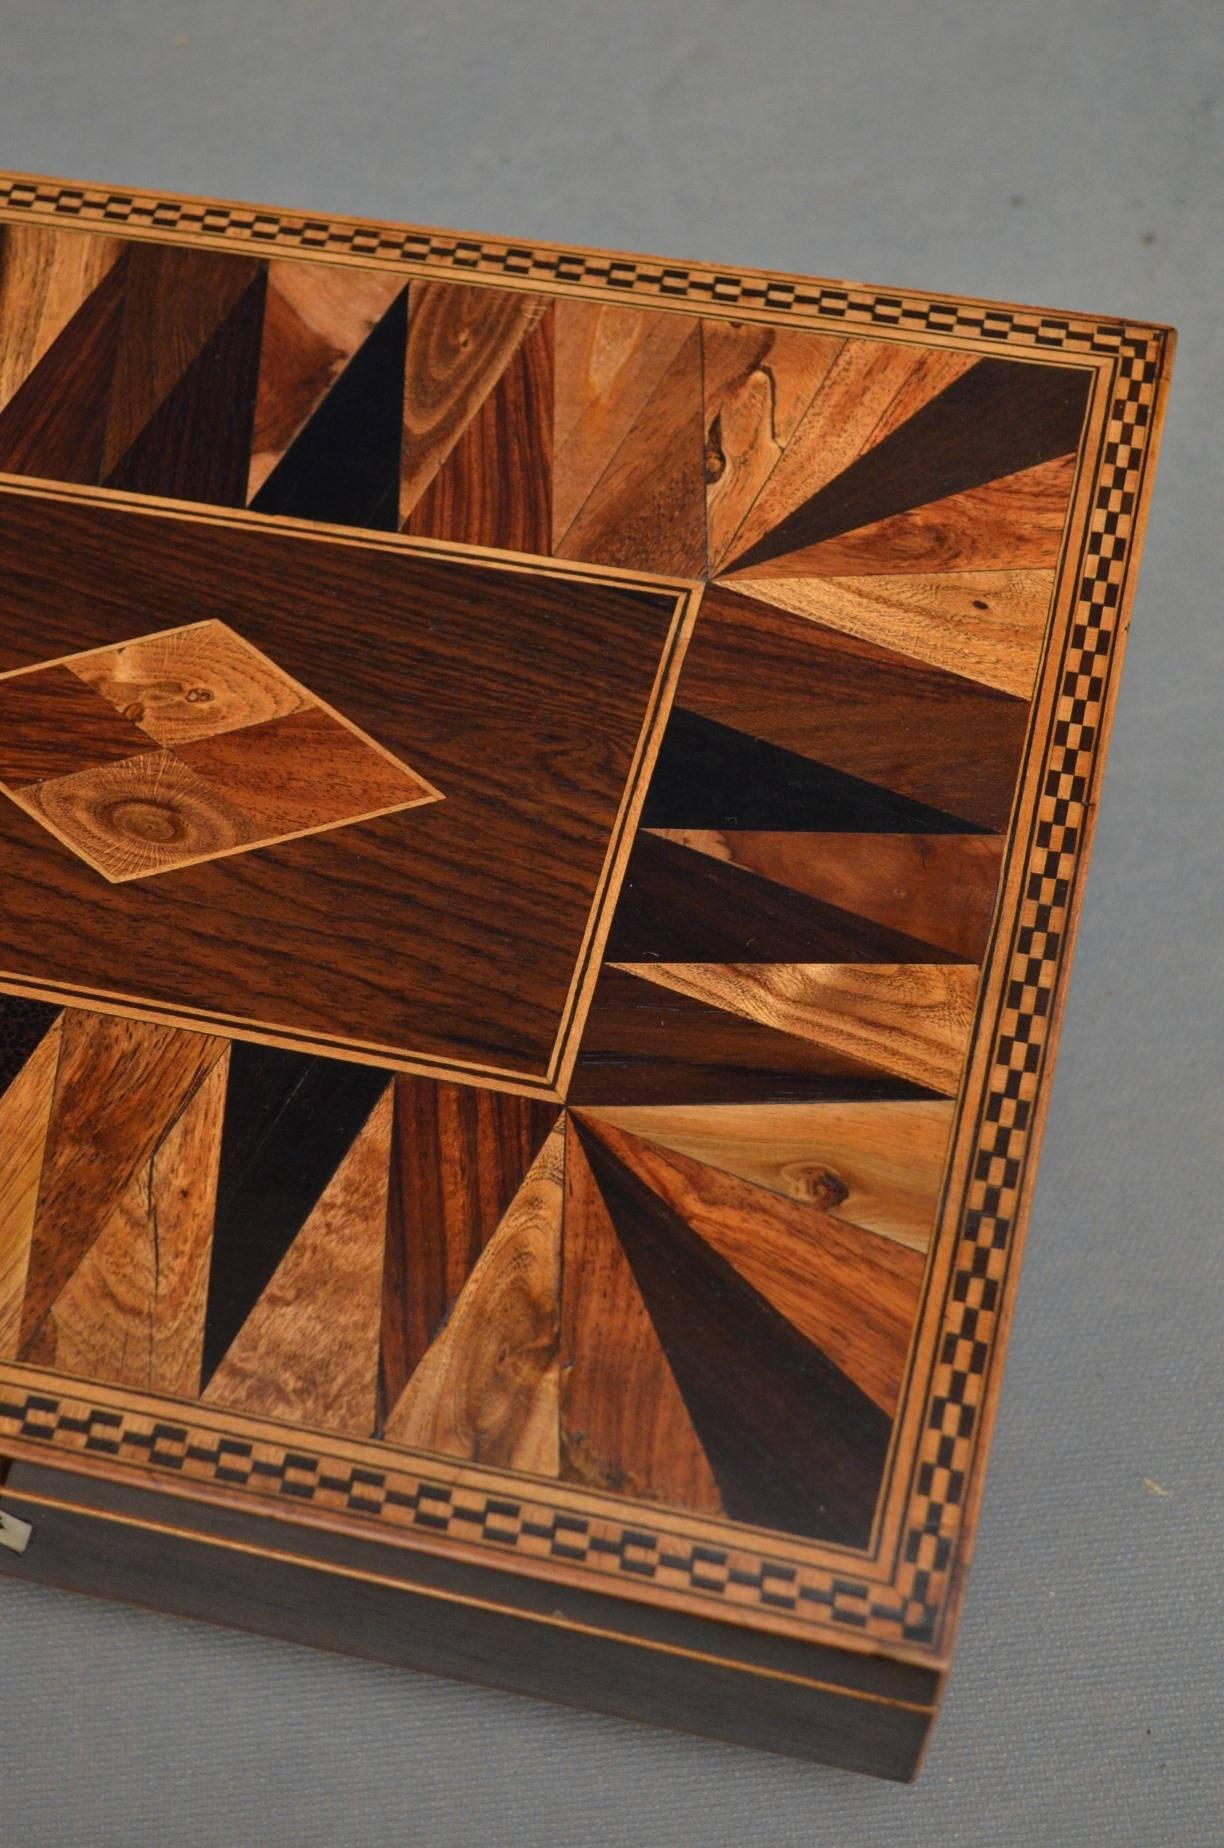 Great Britain (UK) Regency Rosewood Jewelry Box with Tray